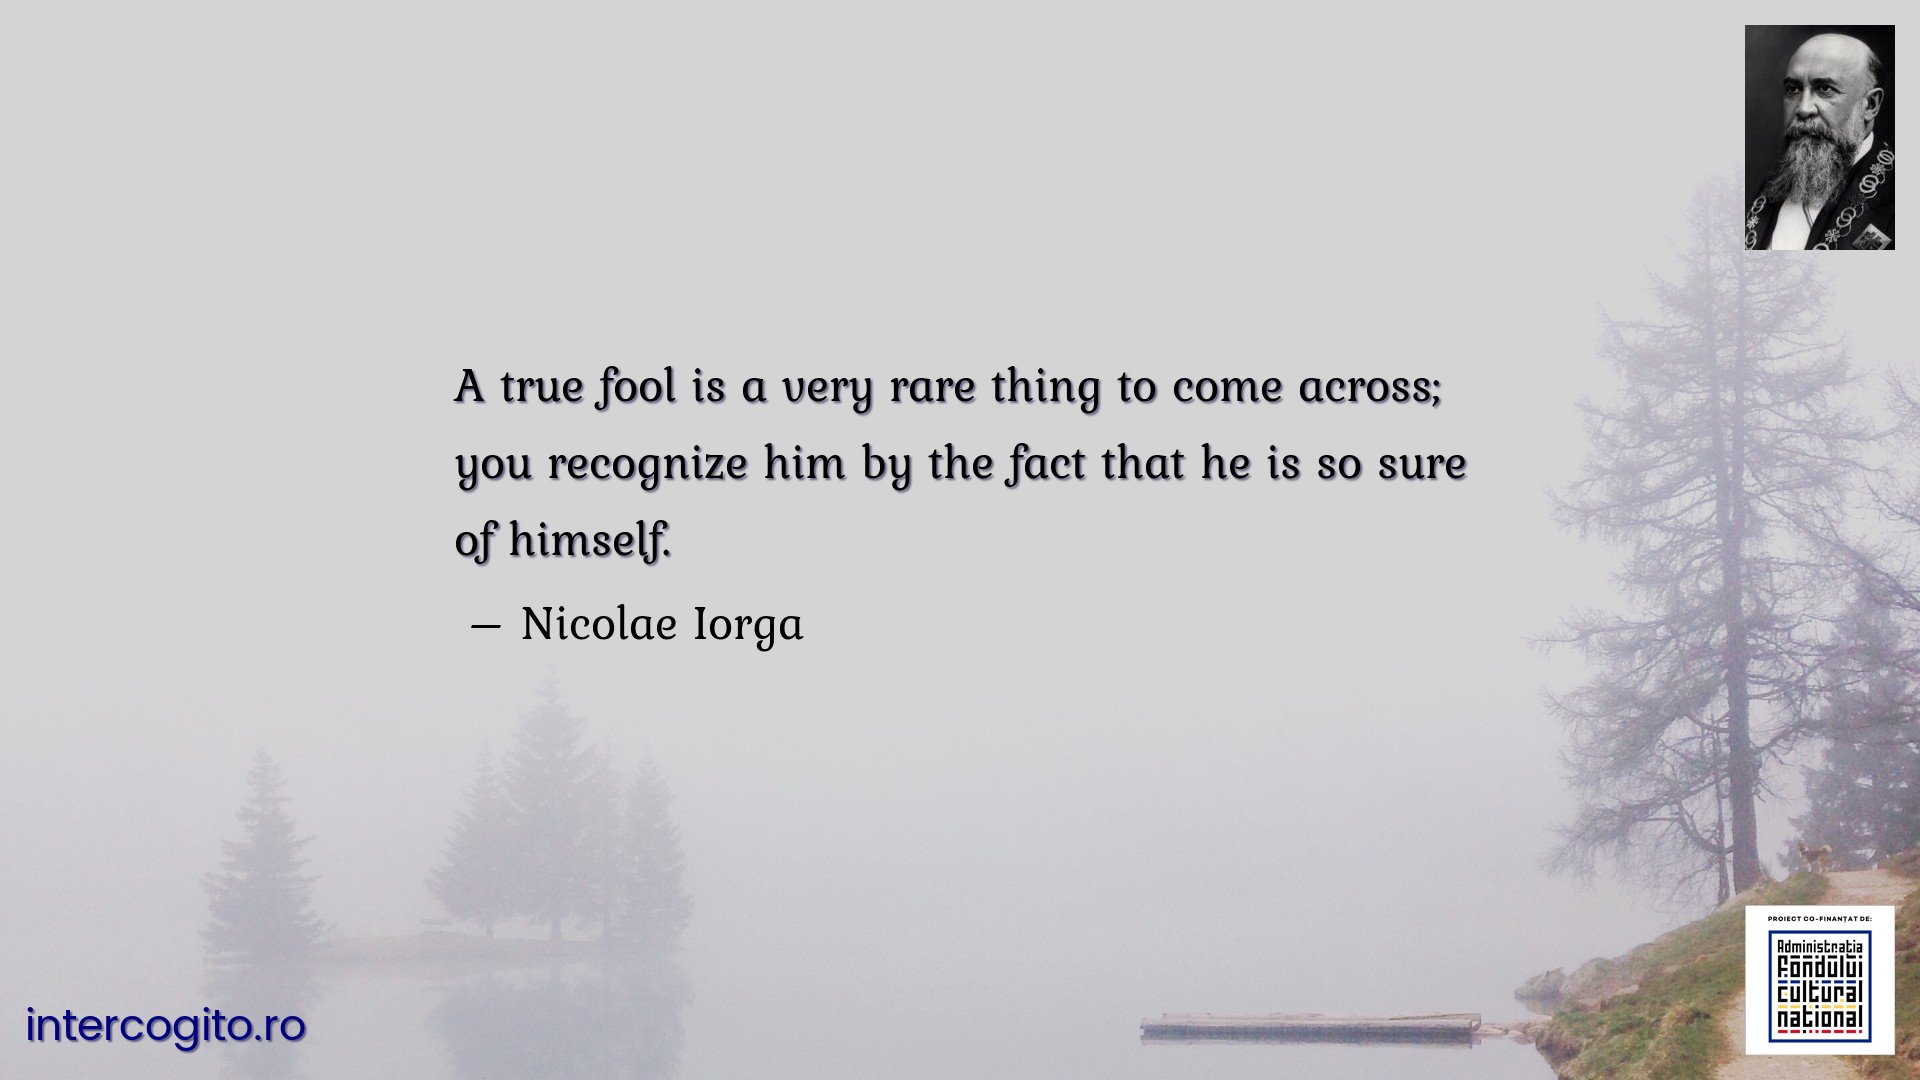 A true fool is a very rare thing to come across; you recognize him by the fact that he is so sure of himself.